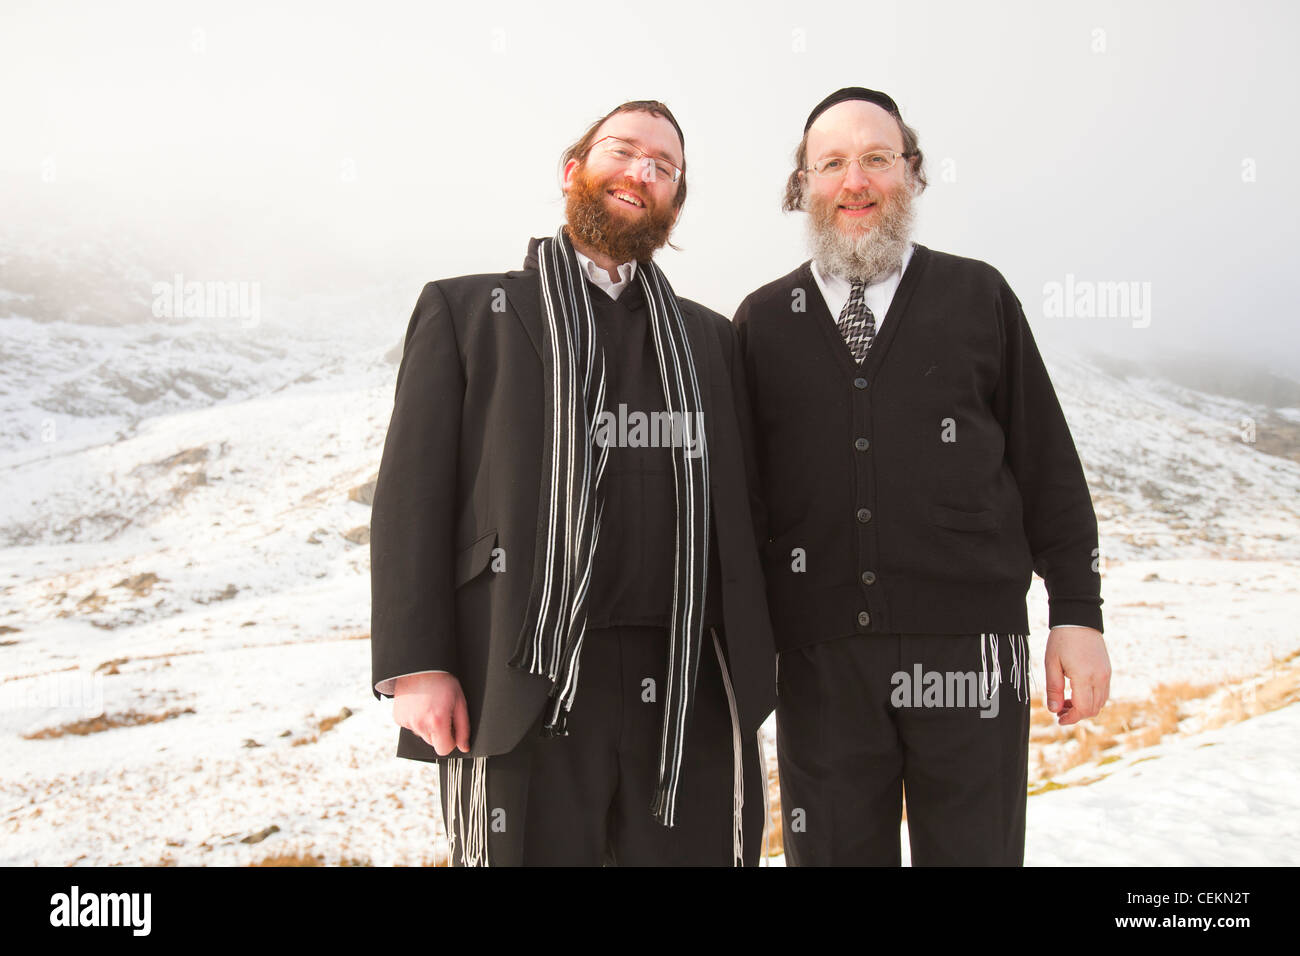 Two Jewish men on kirkstone Pass above Ambleside in the Lake District in snow. UK. Stock Photo